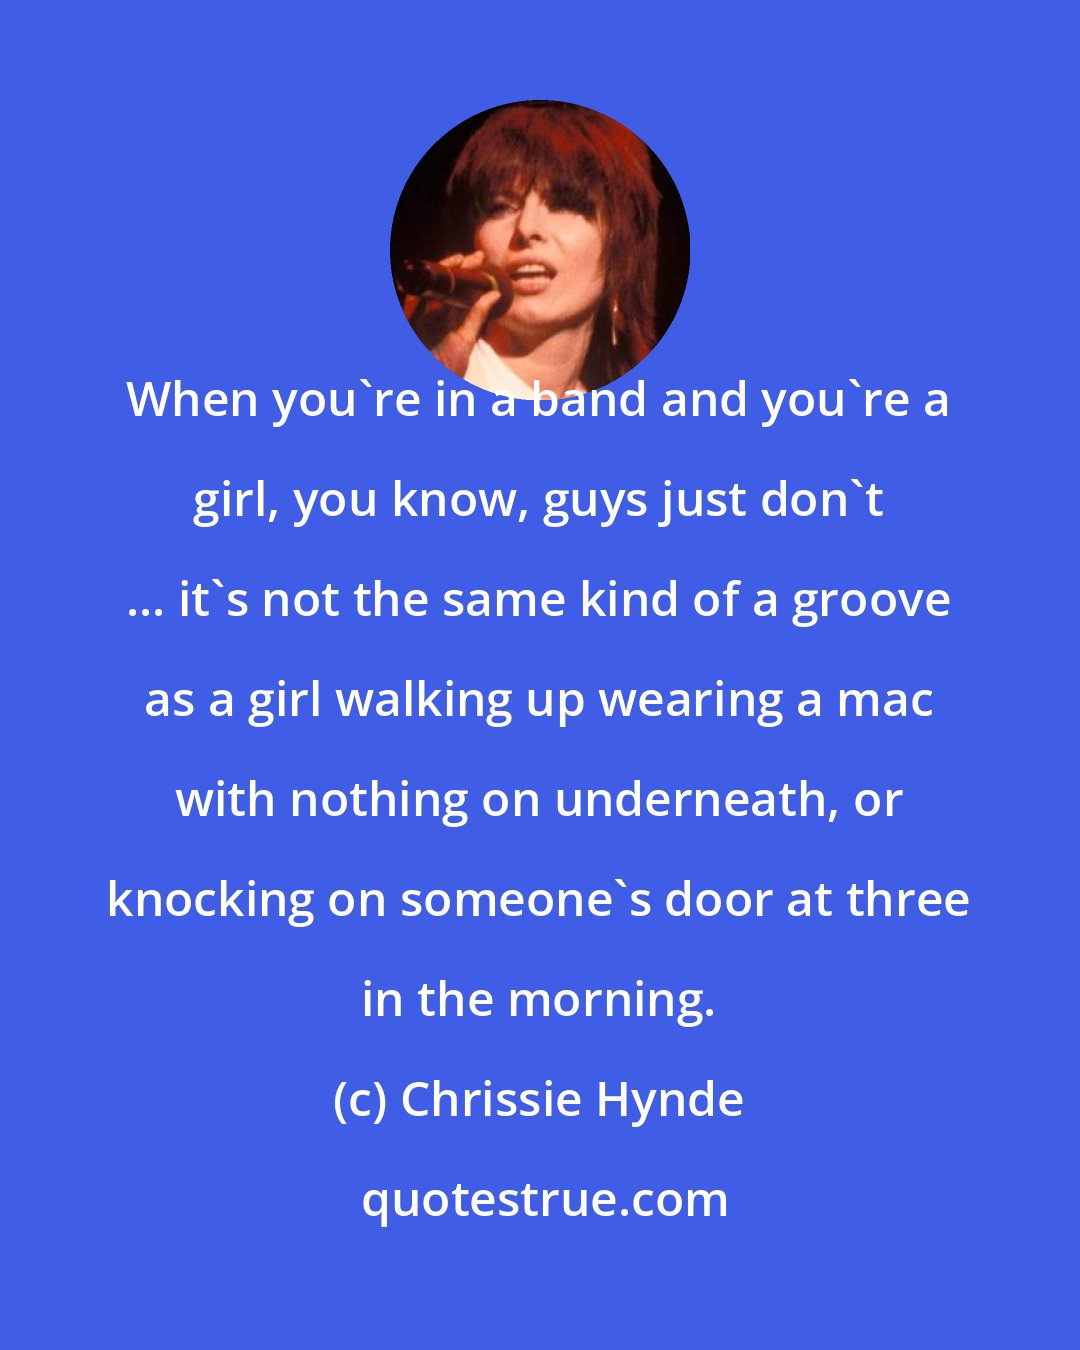 Chrissie Hynde: When you're in a band and you're a girl, you know, guys just don't ... it's not the same kind of a groove as a girl walking up wearing a mac with nothing on underneath, or knocking on someone's door at three in the morning.